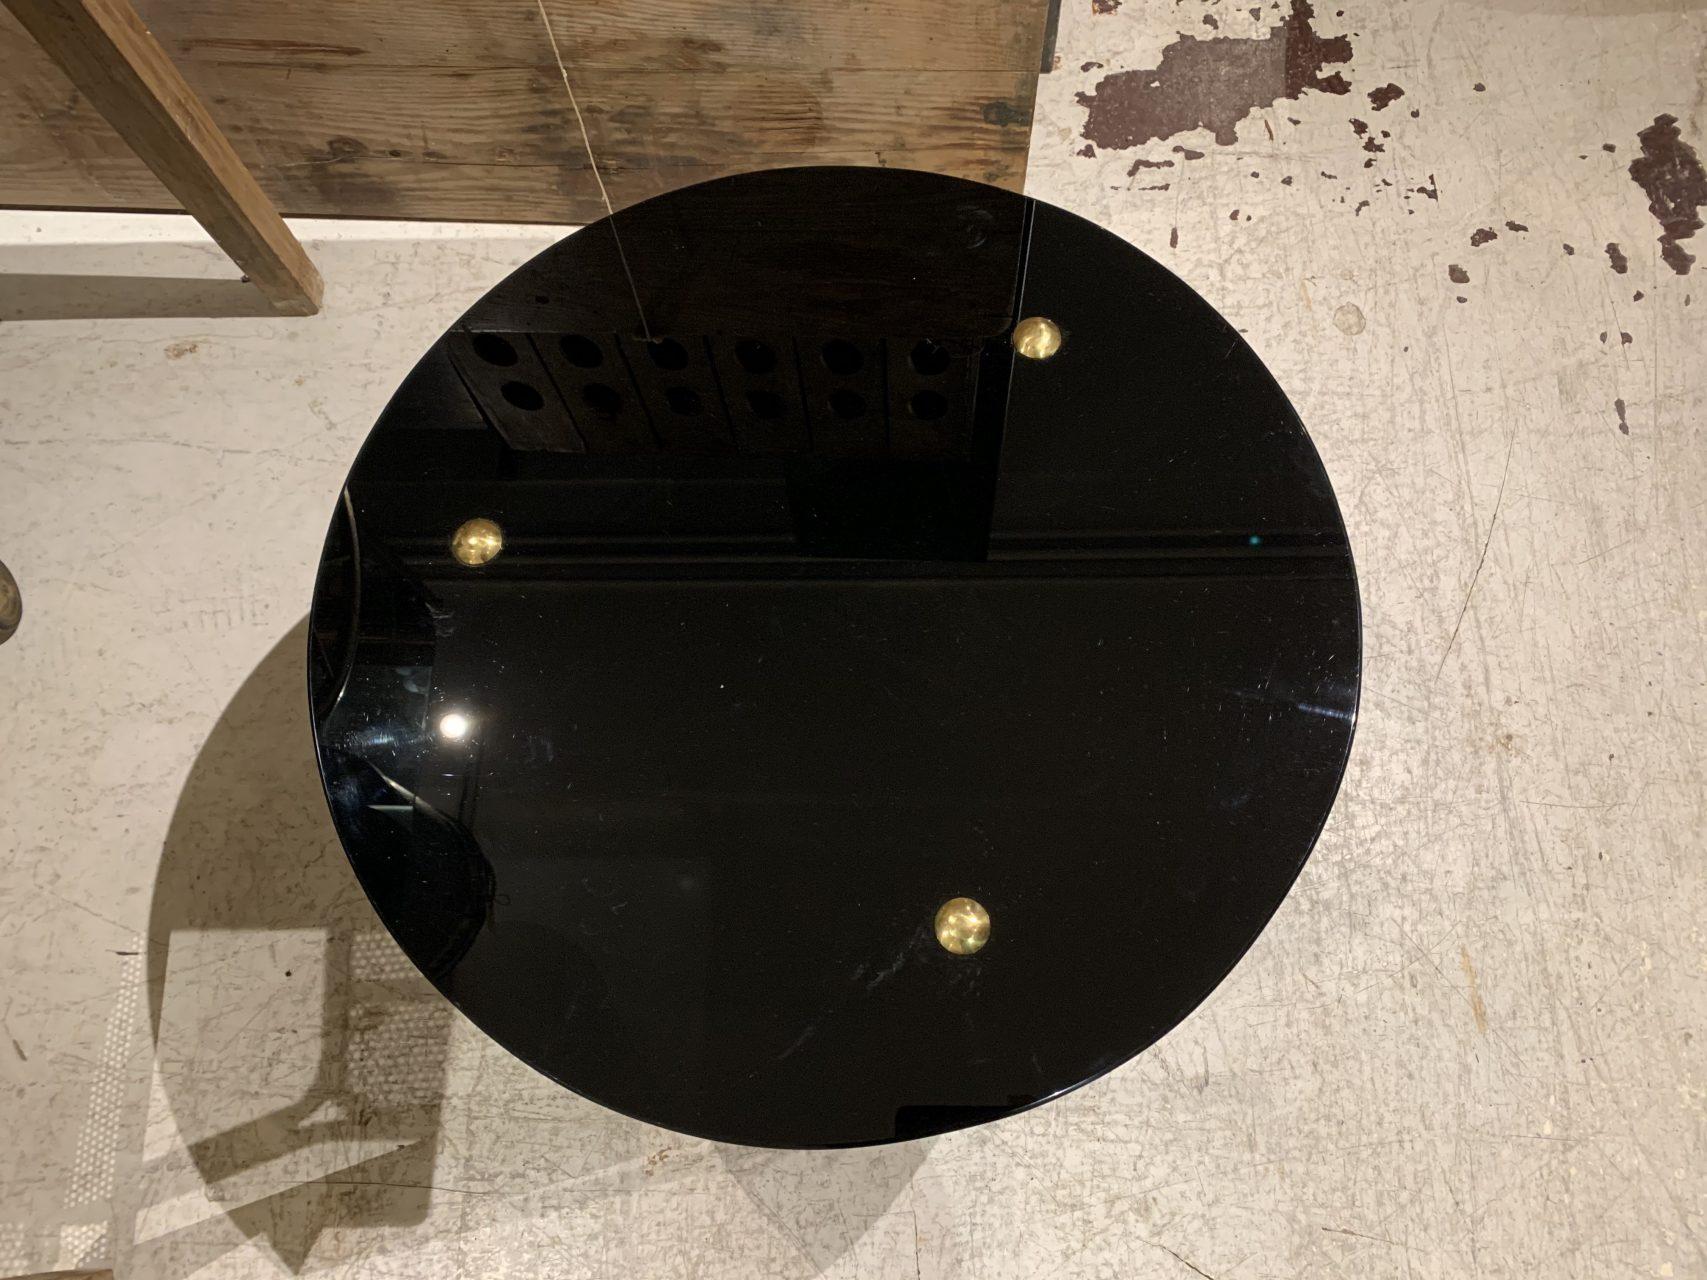 Sophisticated and beautiful circular coffee table in glass and brass from late midcentury, France. Elegantly made with 3 slender fluted brass legs and 2 strong round opaque black glass, giving an exclusive look.

Perfect furniture for the living